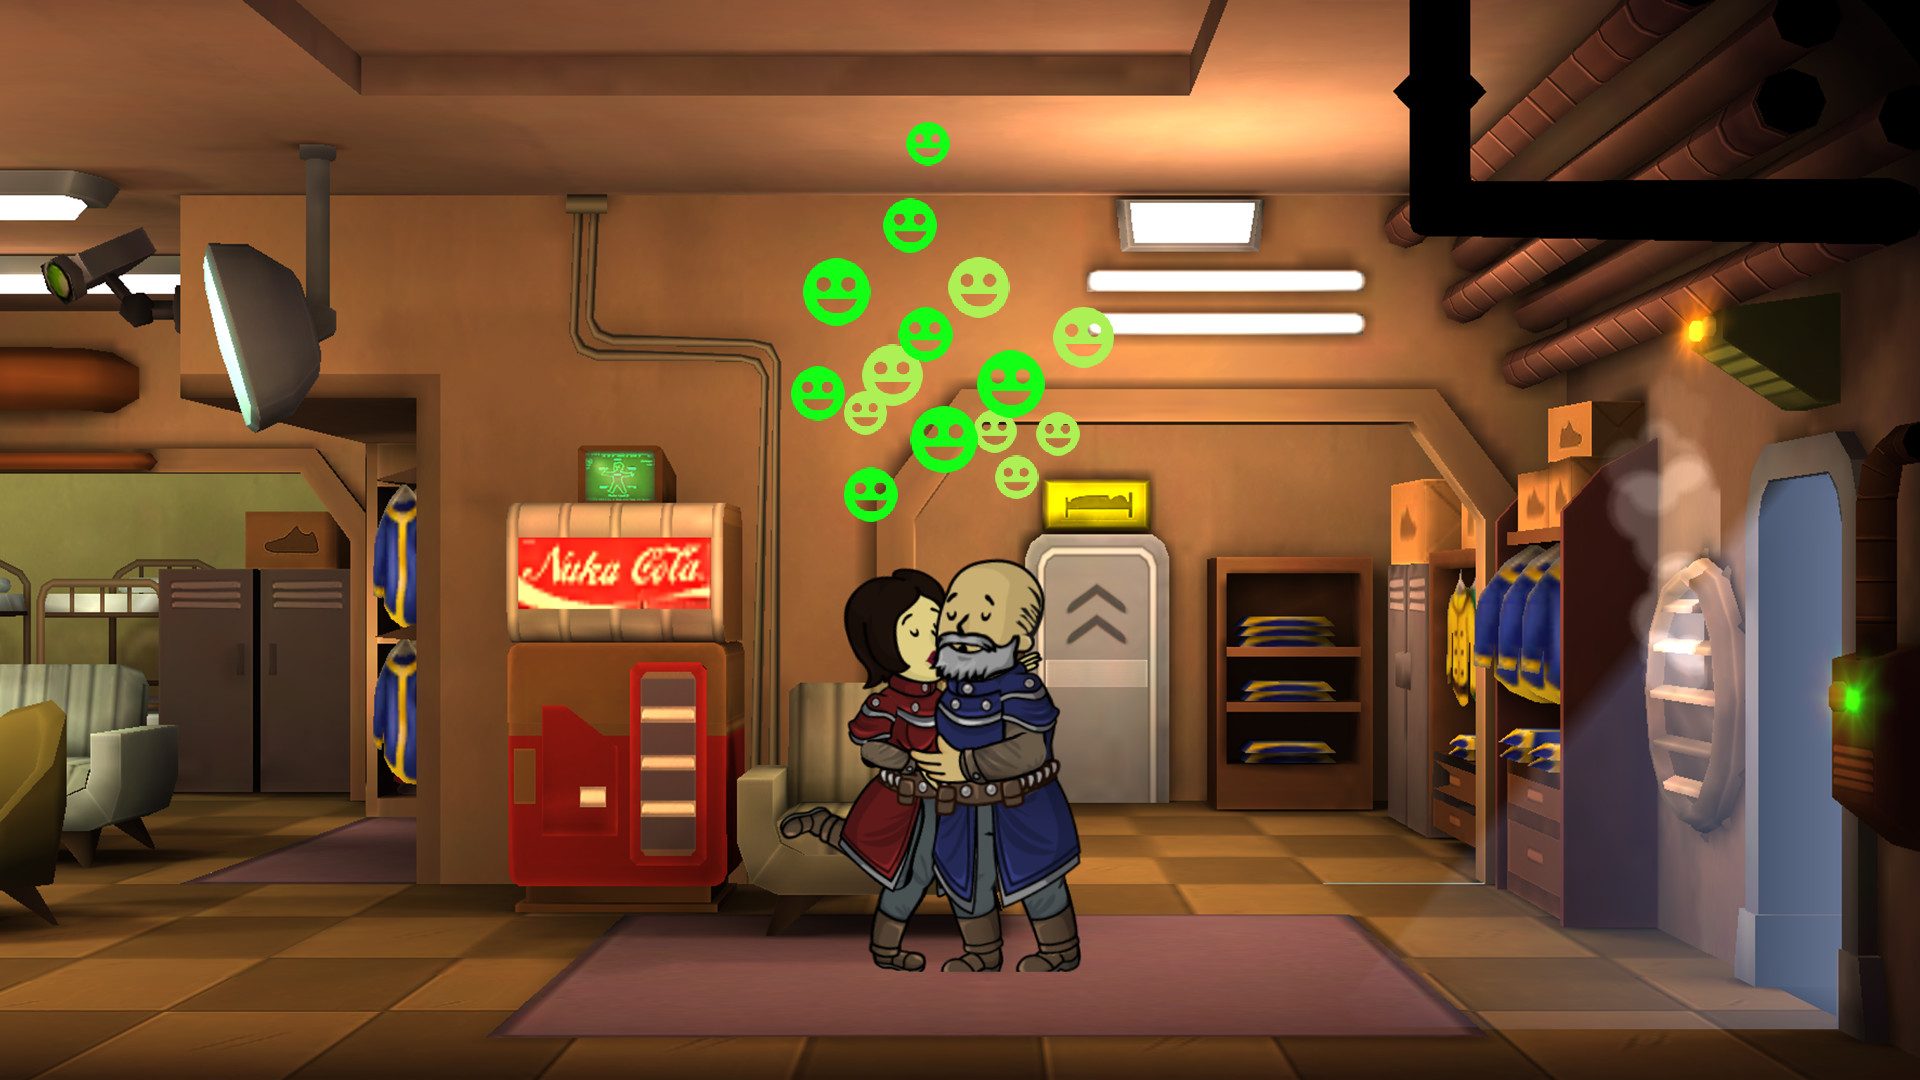 tower games like fallout shelter